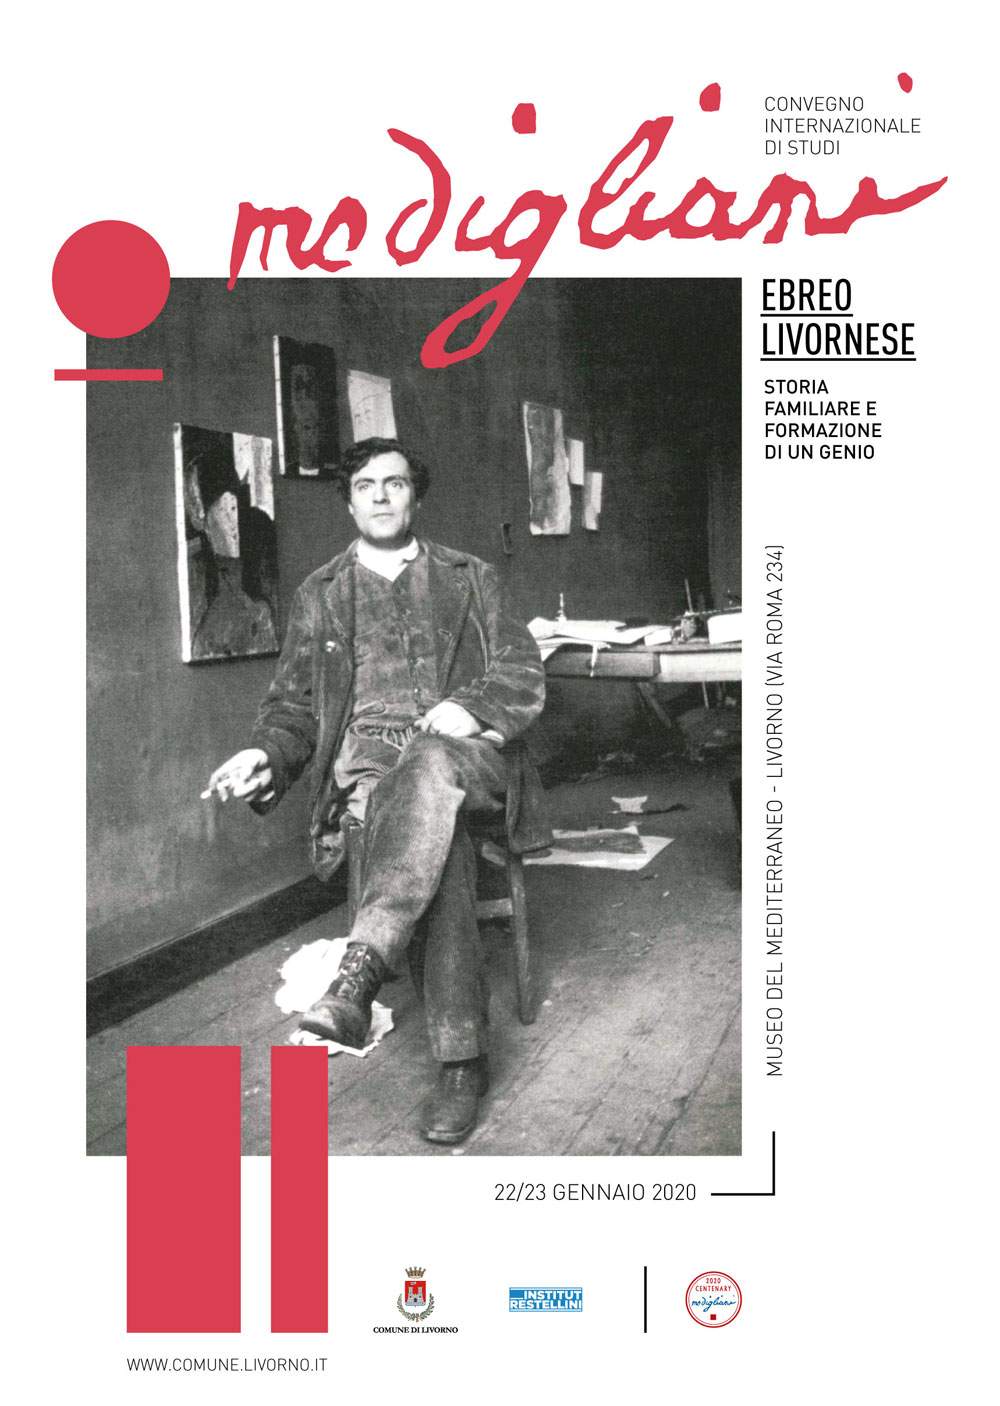 An international conference in Livorno on the history of Modigliani as a Leghorn Jew